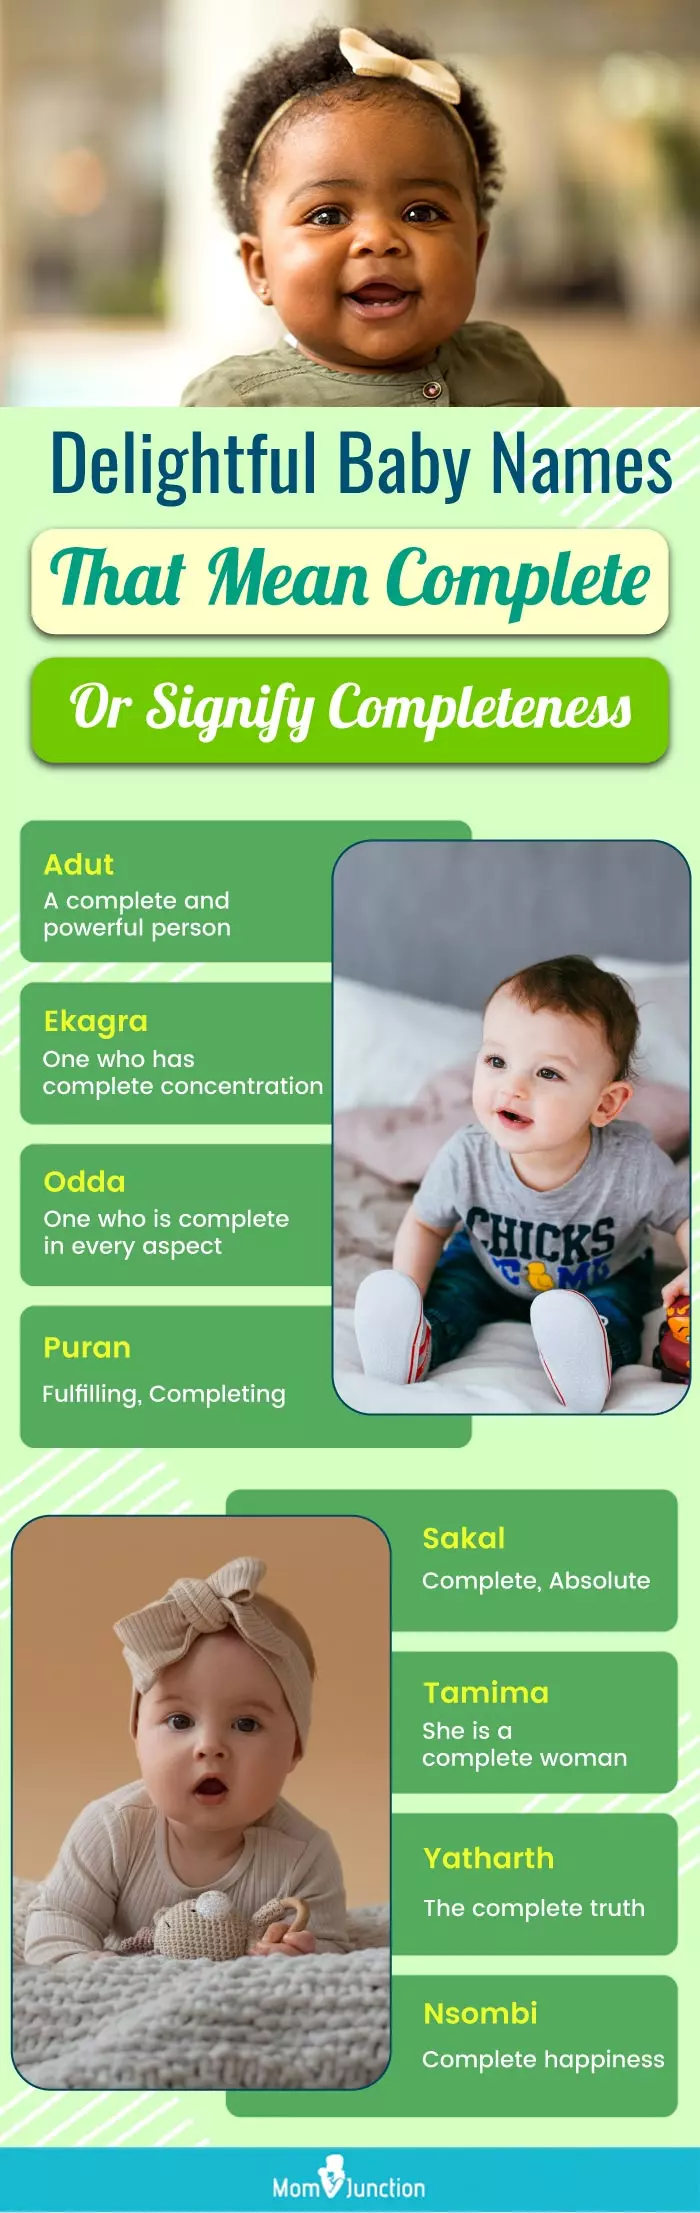 delightful baby names that mean complete or signify completeness(infographic)